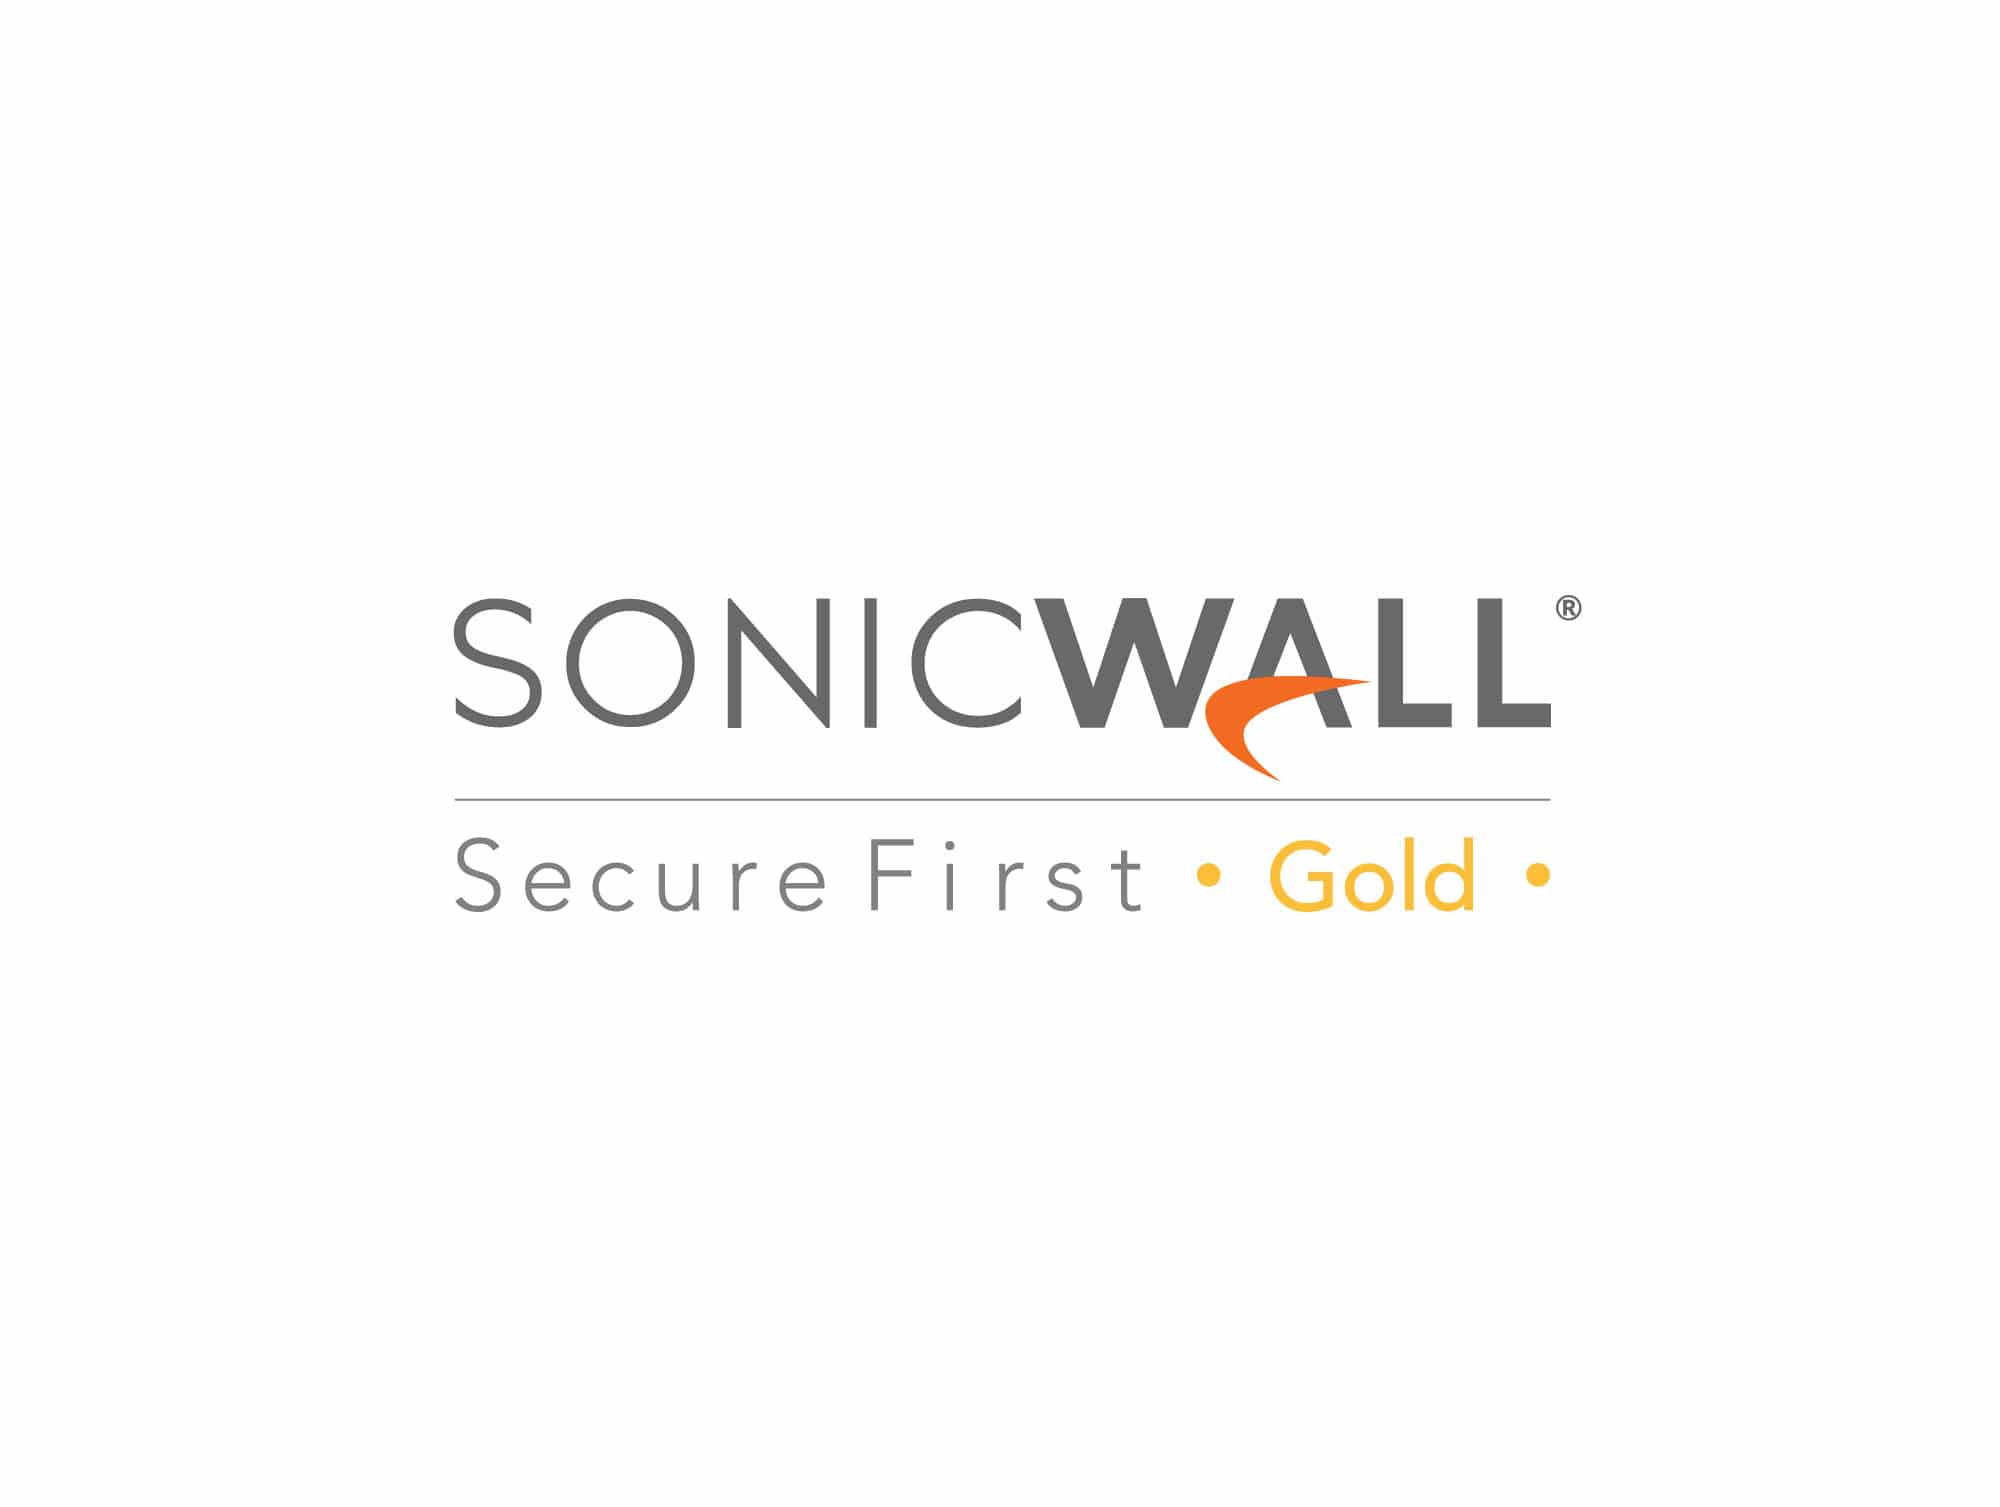 Sonicwall Logo Secure First Gold